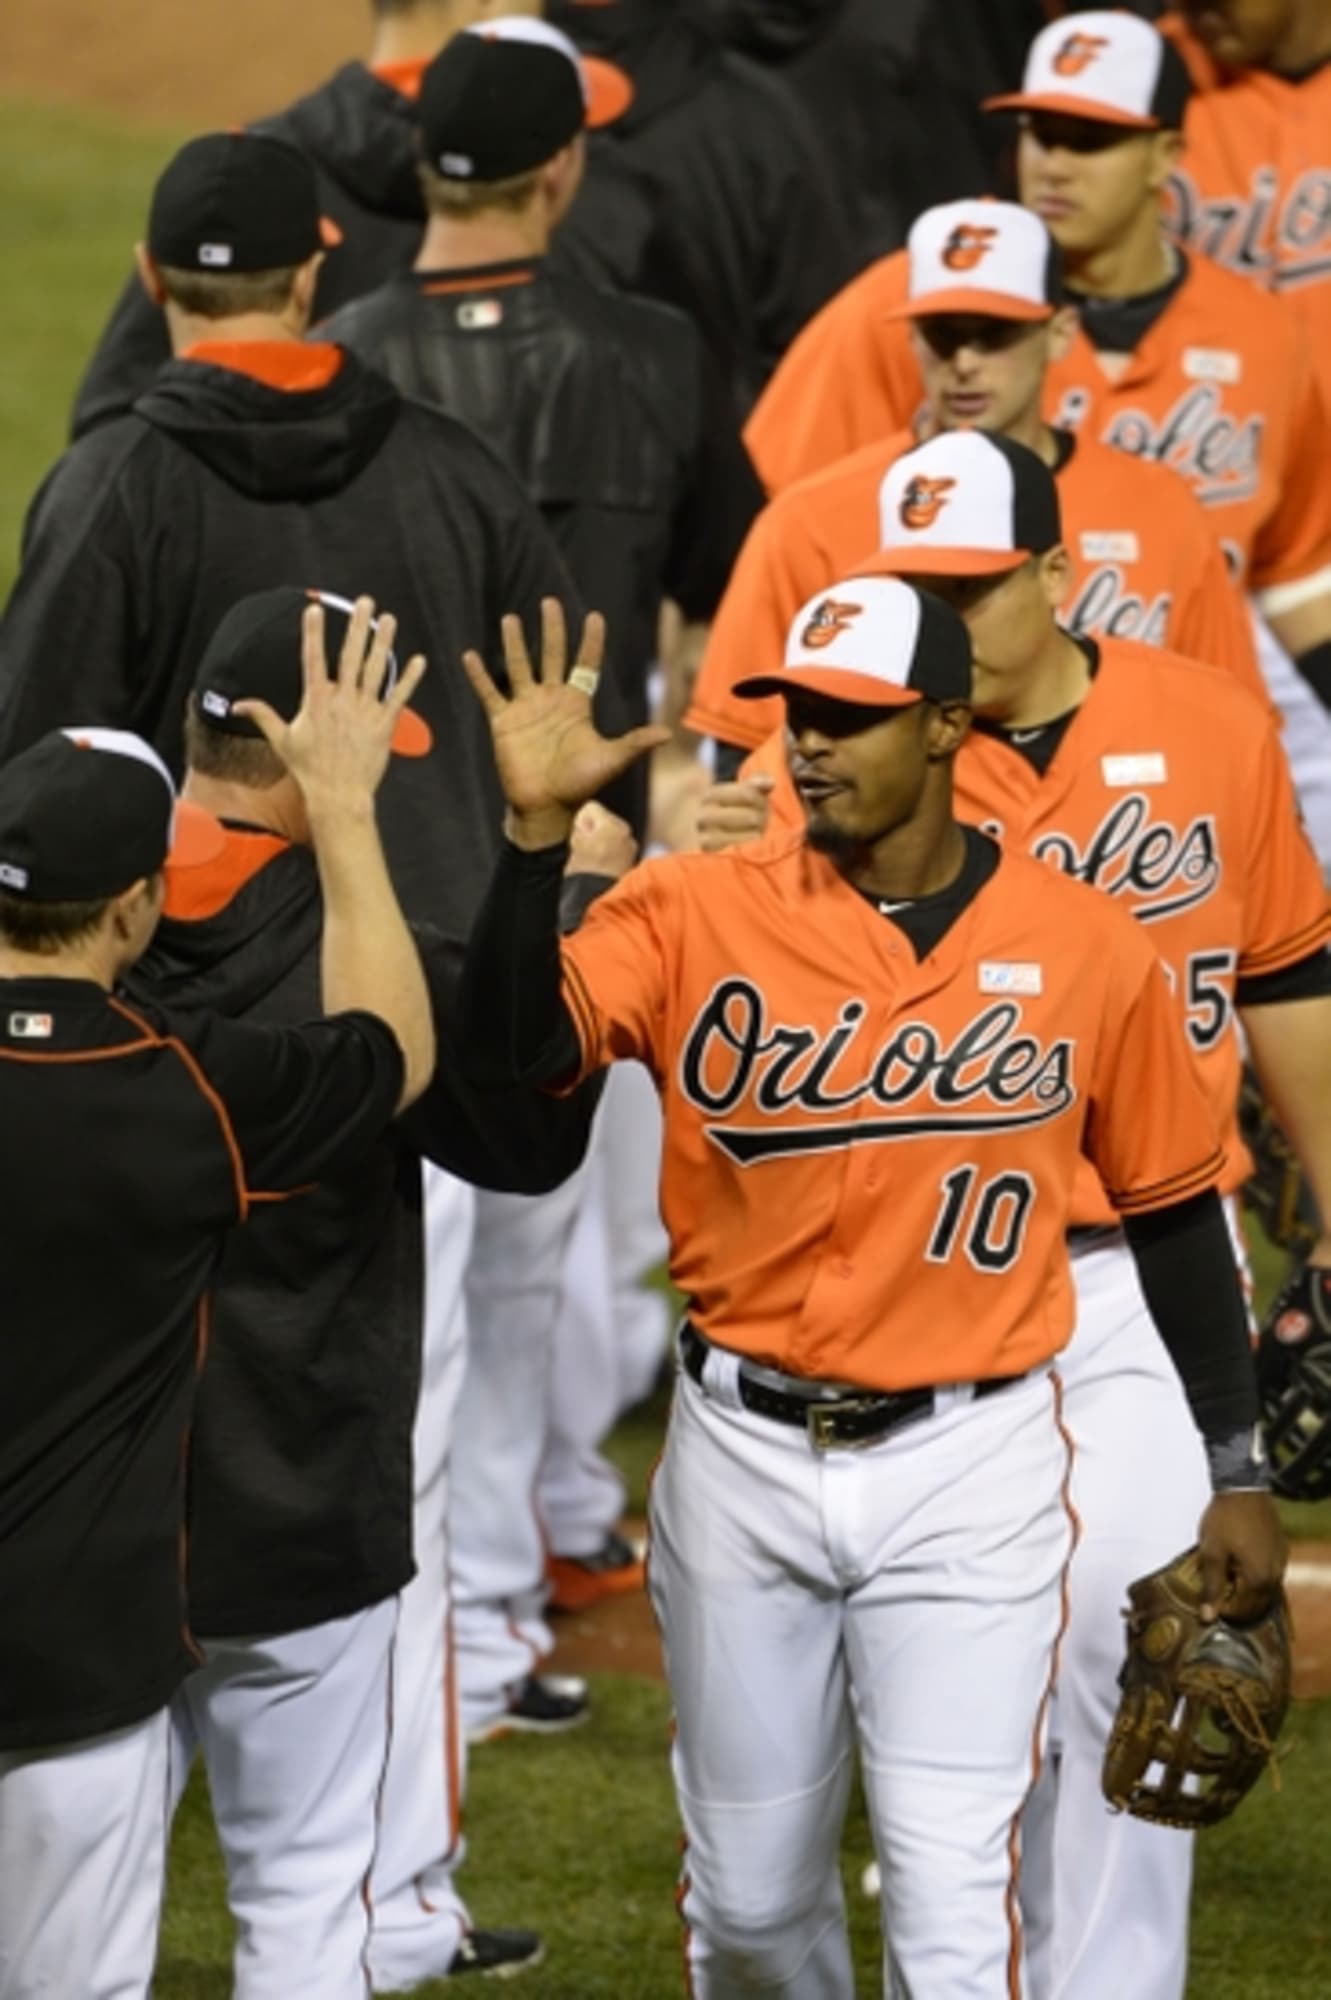 Baltimore Orioles: Additional Meaning for Spring Games